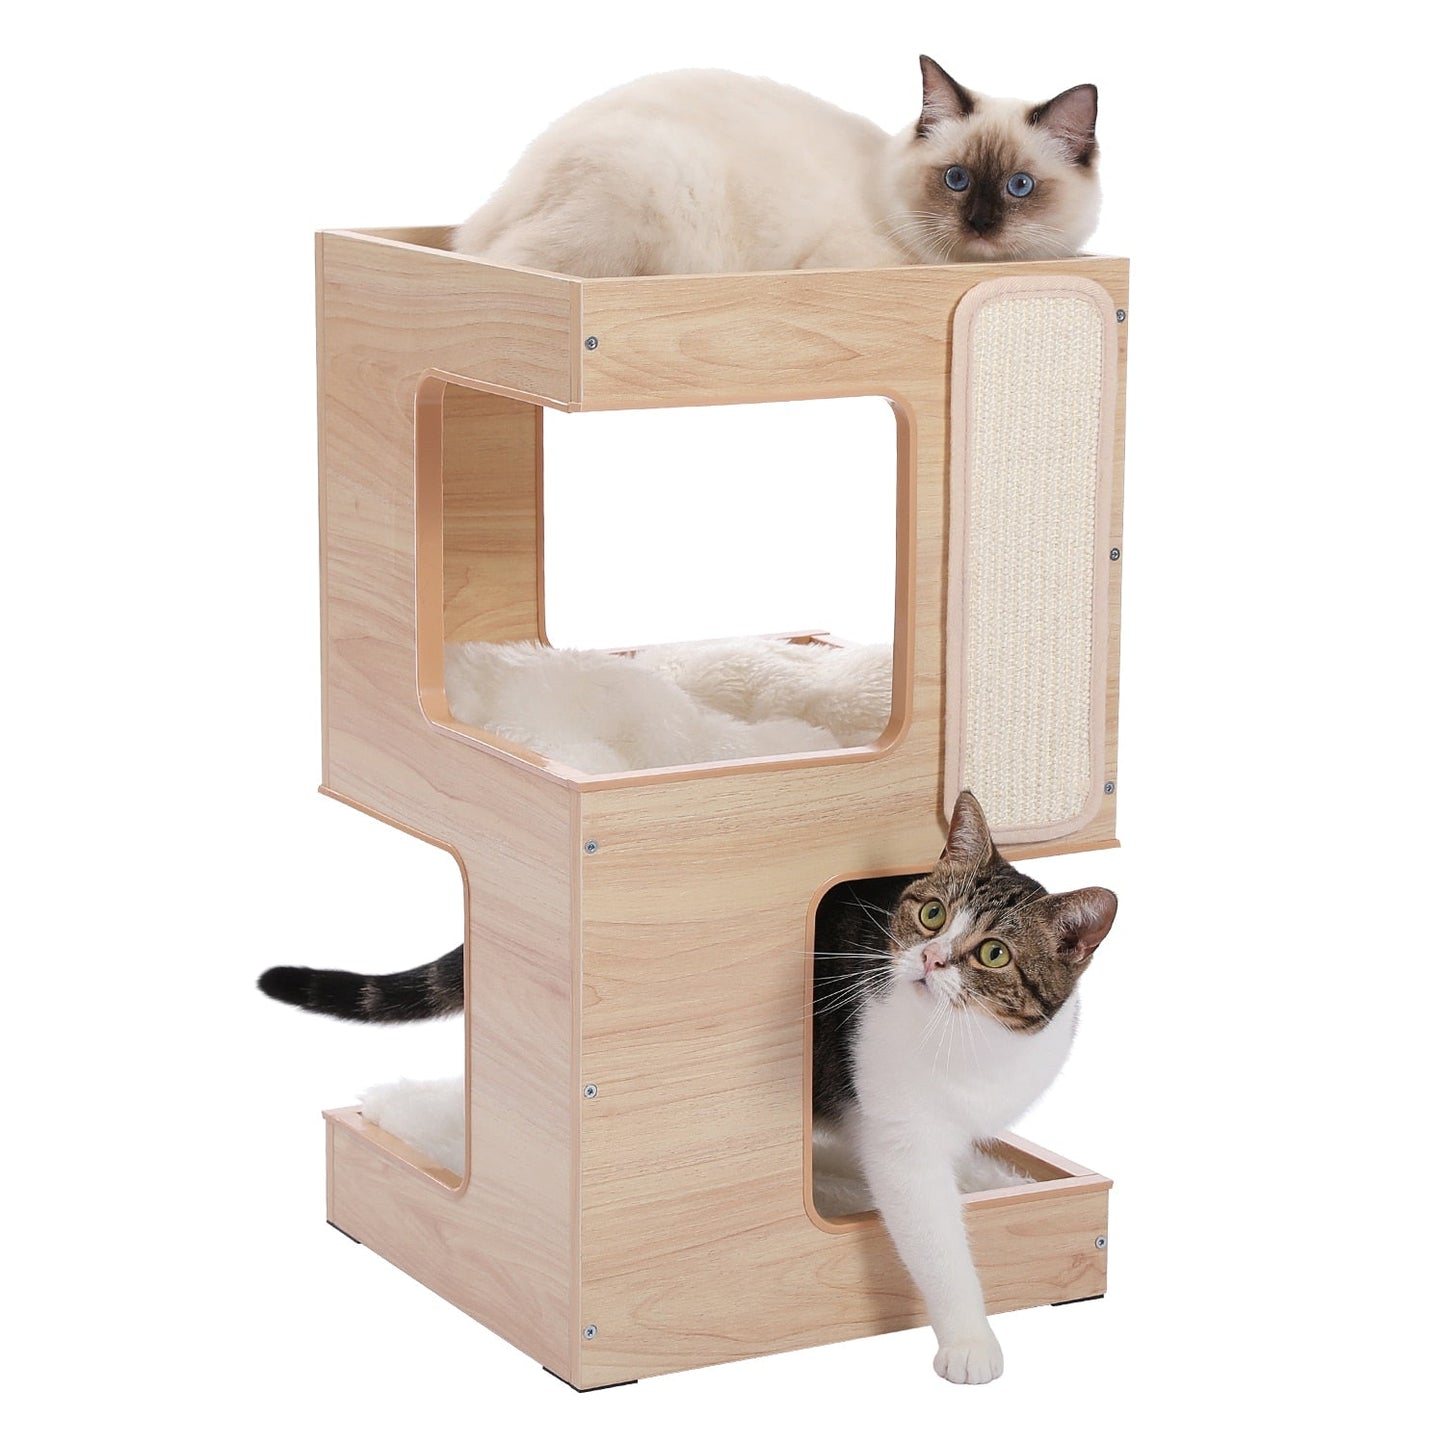 cats playing in a modern cat tree tower